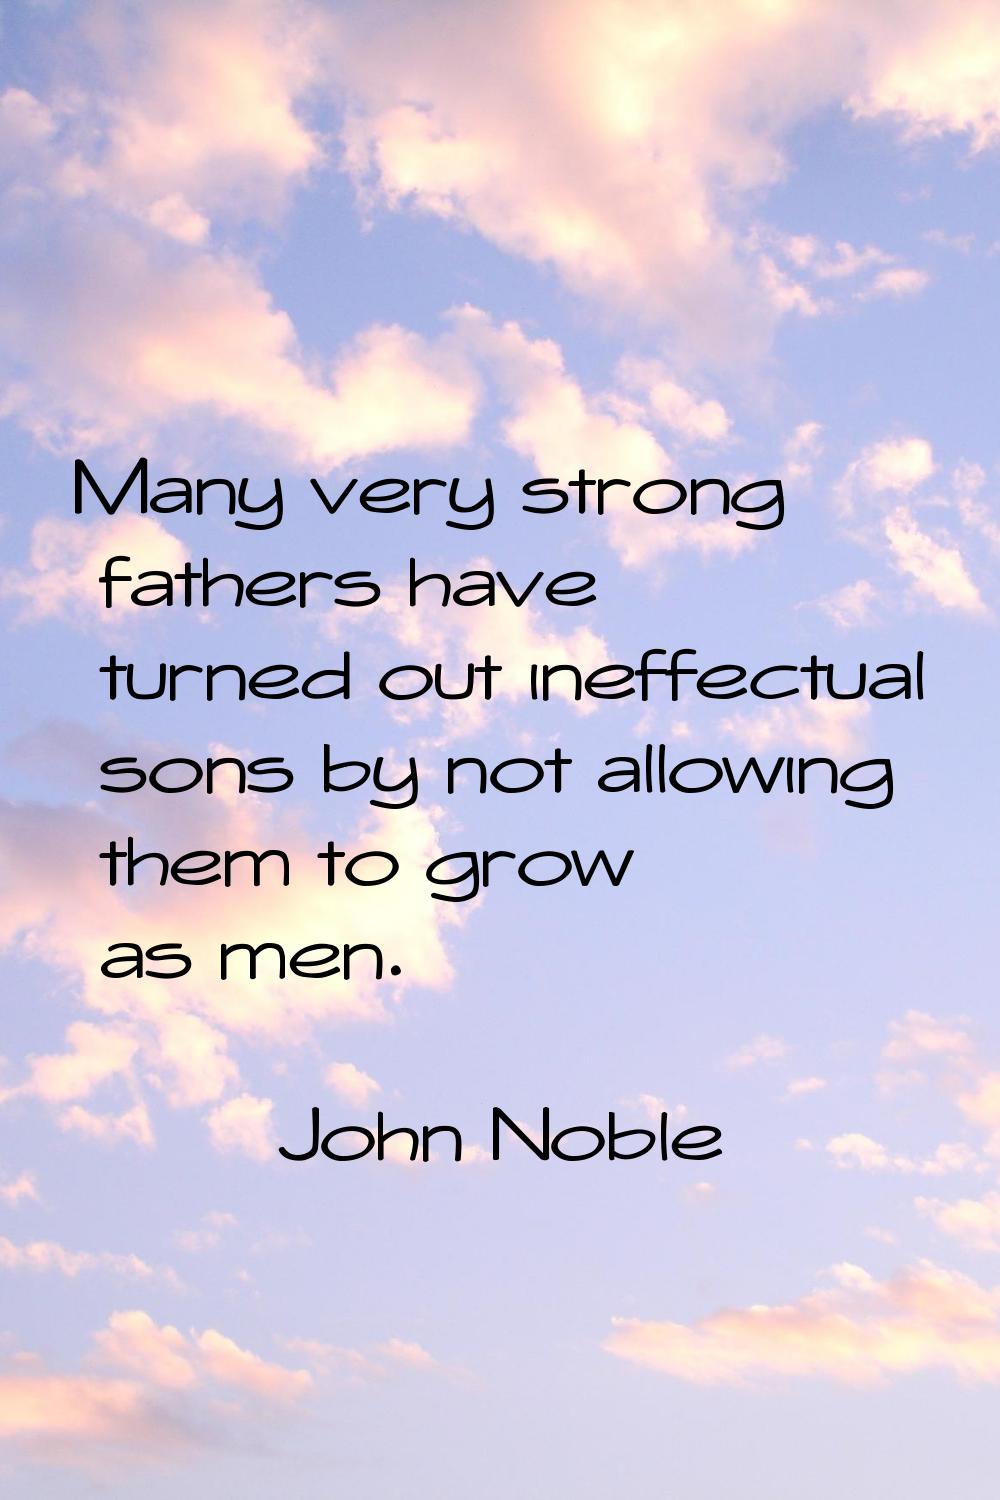 Many very strong fathers have turned out ineffectual sons by not allowing them to grow as men.